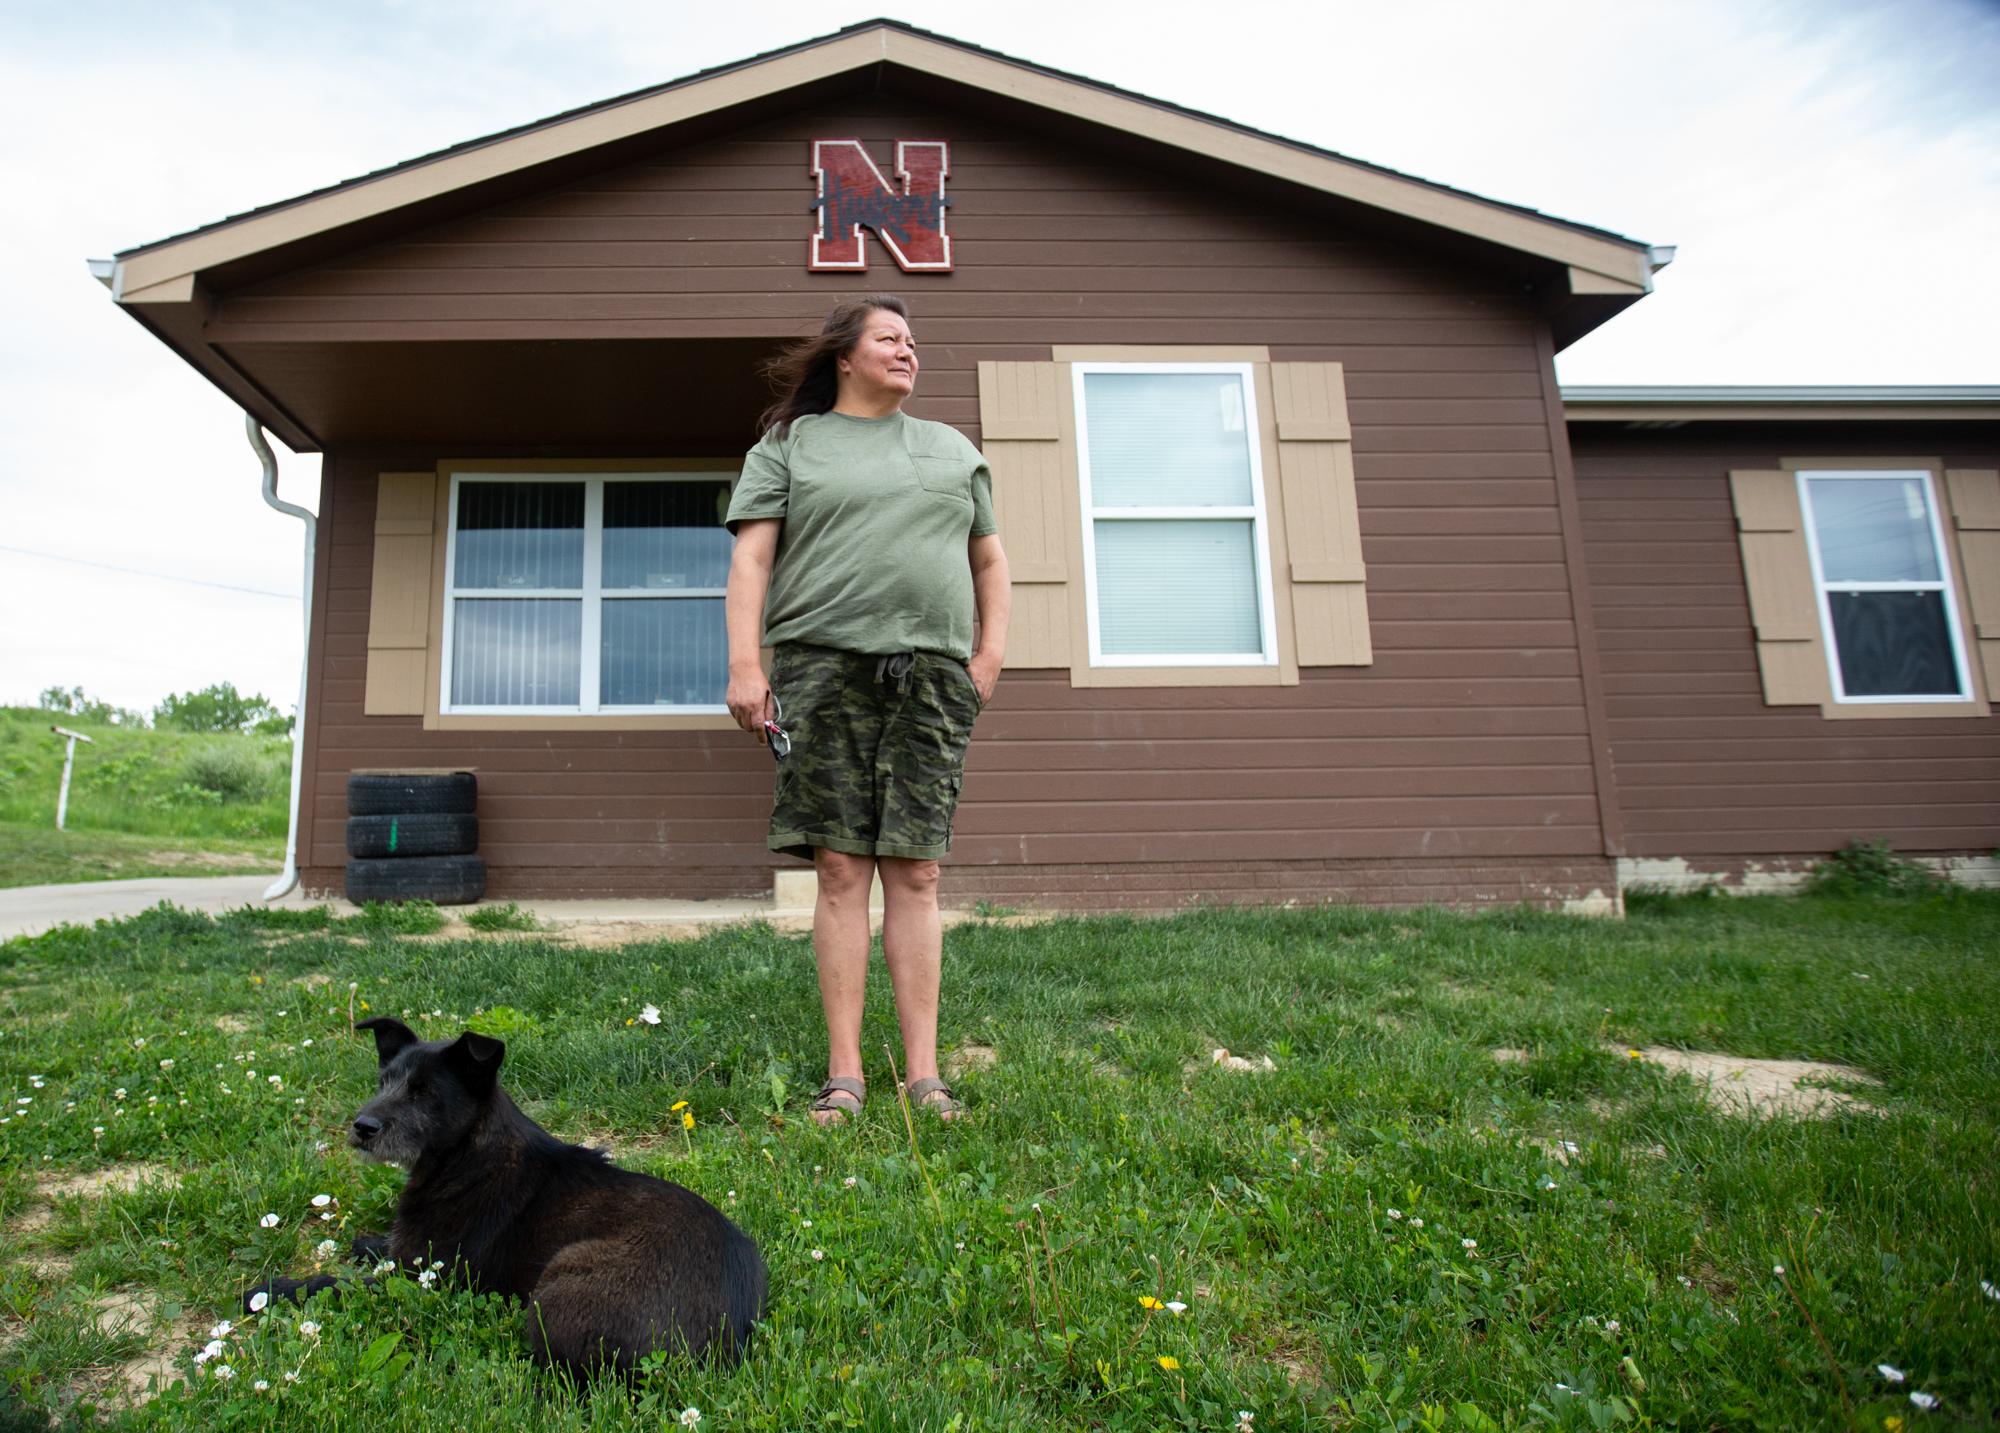 Debra Grant - Debra Grant, a member of the Omaha Tribe of Nebraska, lost her home to floods in 2011. She and her family spent five years living in a temporary home with mold damage, but they recently moved into a permanent home with two of her children and five  grandchildren. But in March 2019, the Missouri River flooded, filling the basement of her new home with water, even though she had moved to higher ground. (Anya Magnuson/News21)